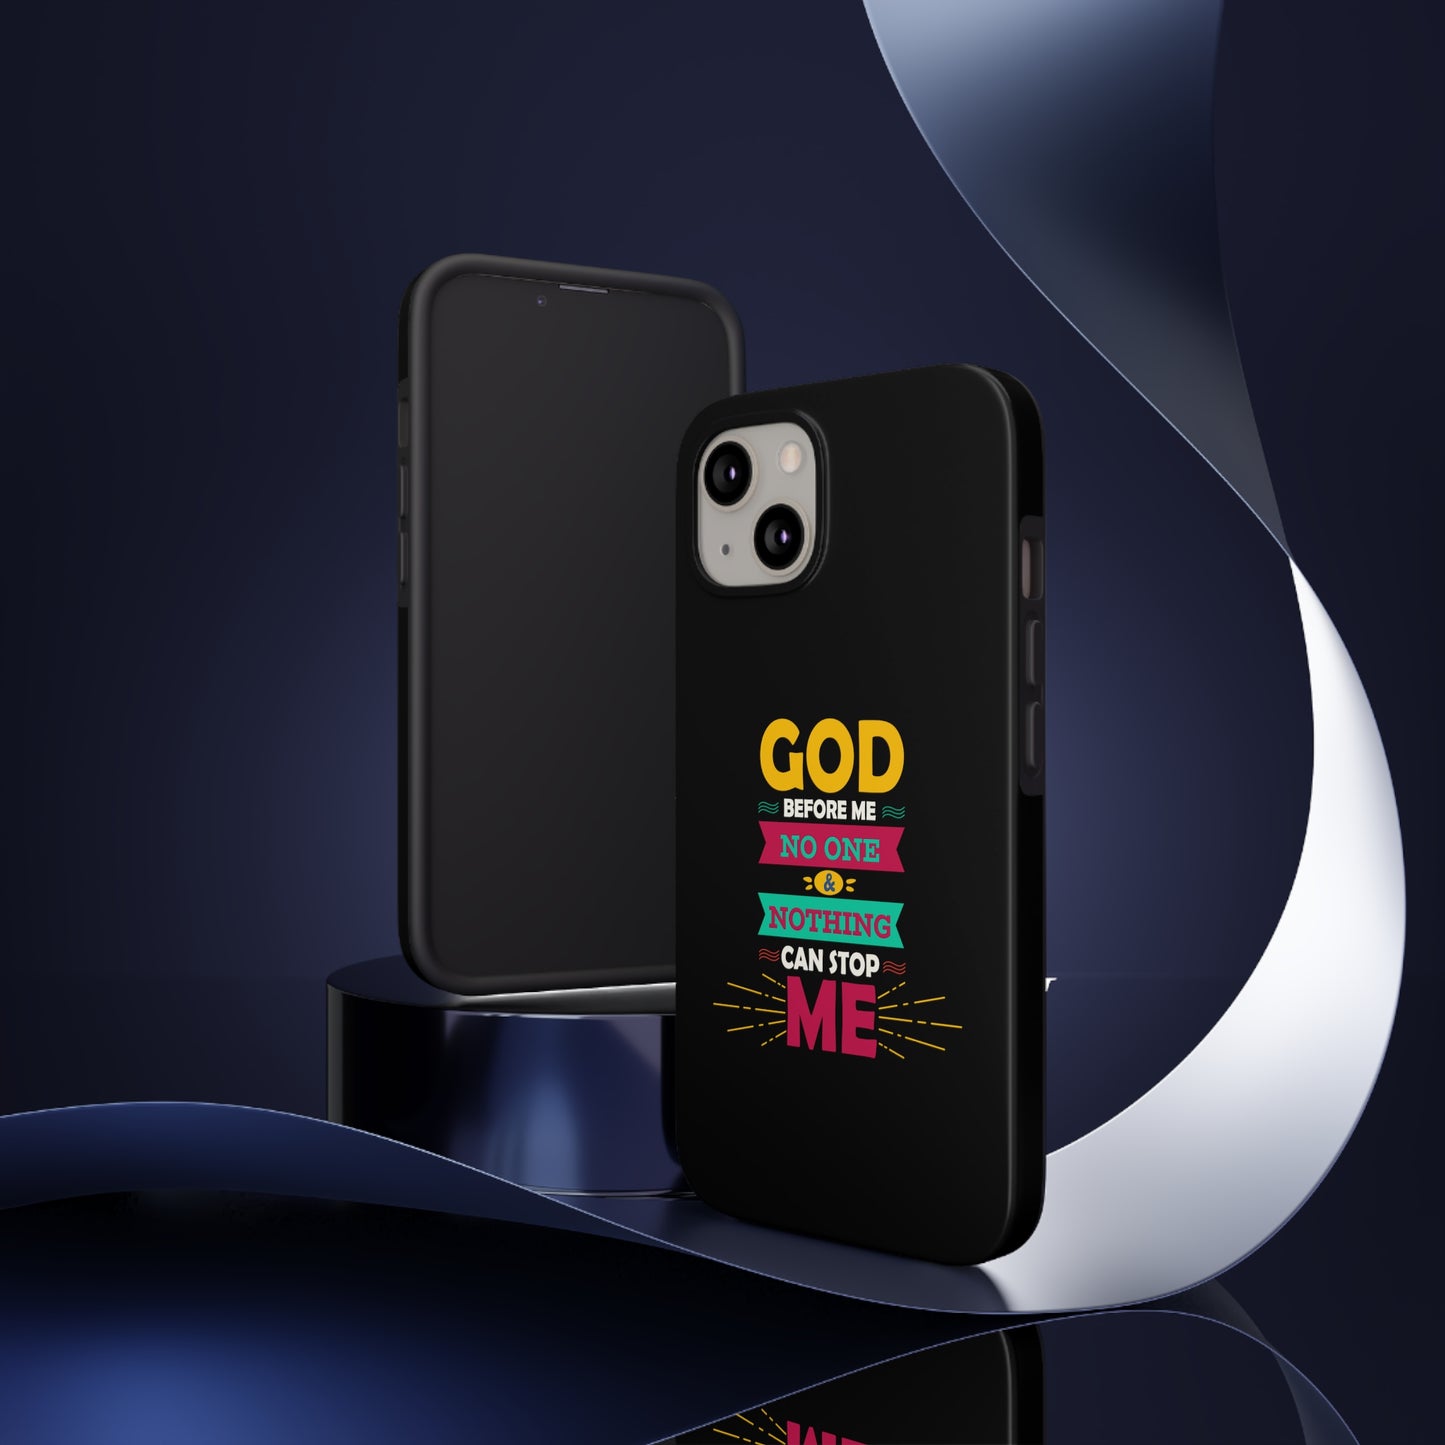 God Before Me No One & Nothing Can Stop Me Tough Phone Cases, Case-Mate